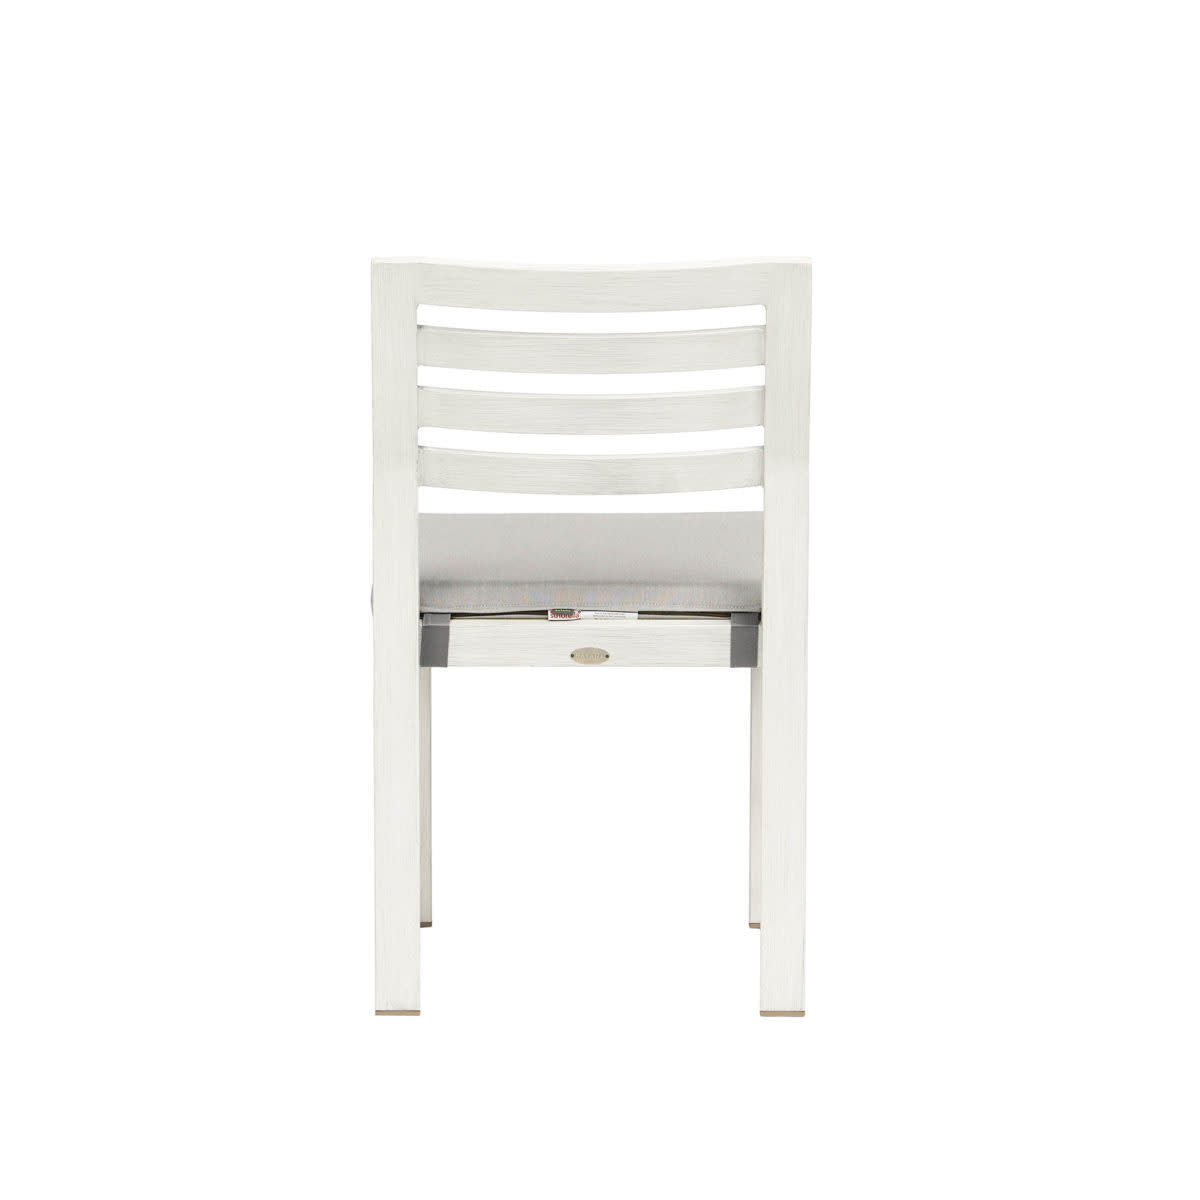 Park Lane Dining Side Chair